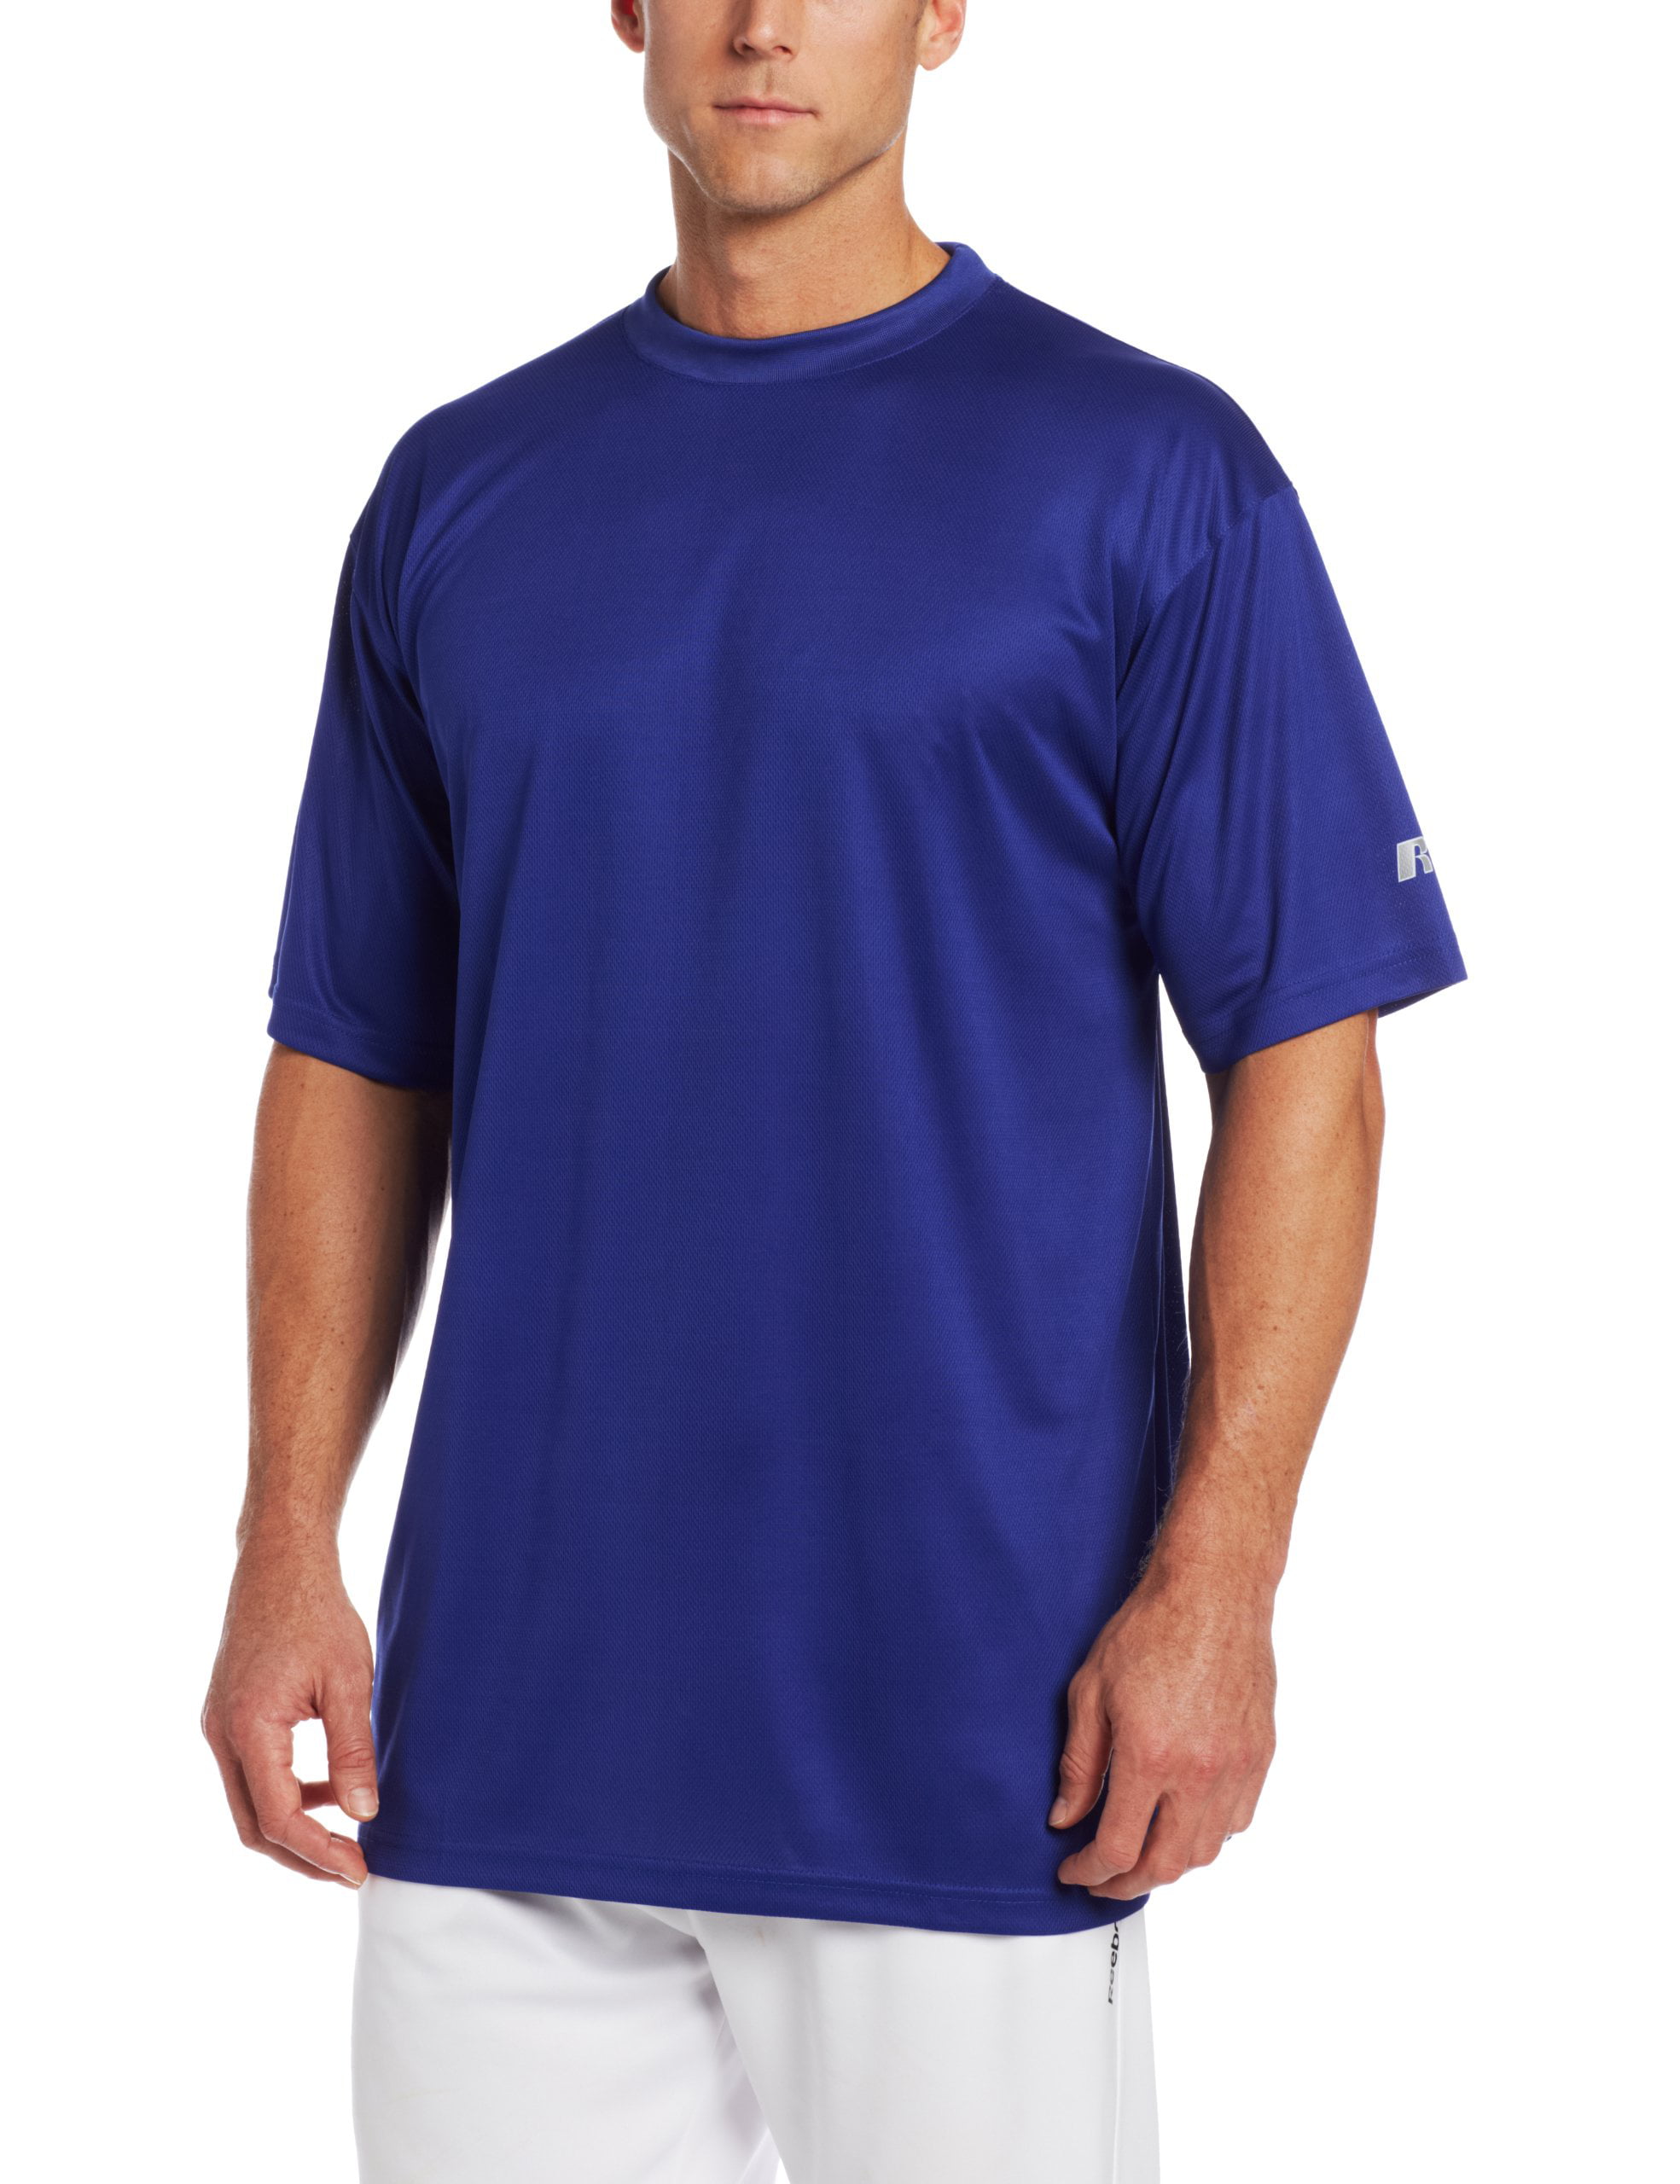 Russell Athletic - Russell Athletic Men's Big & Tall Dri-Power ...